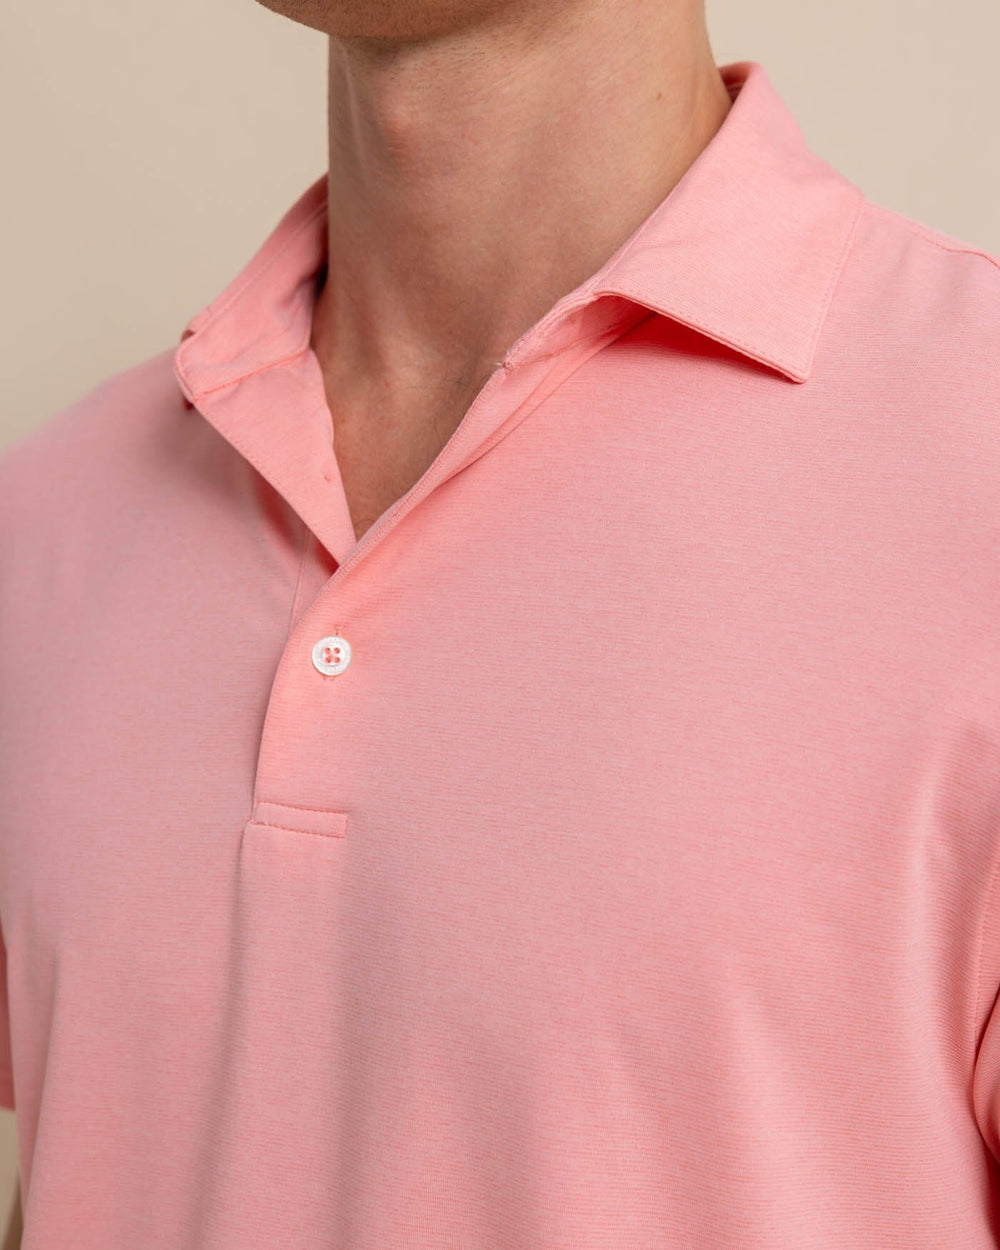 The detail view of the Southern Tide brrr-eeze-heather-performance-polo-shirt by Southern Tide - Heather Flamingo Pink